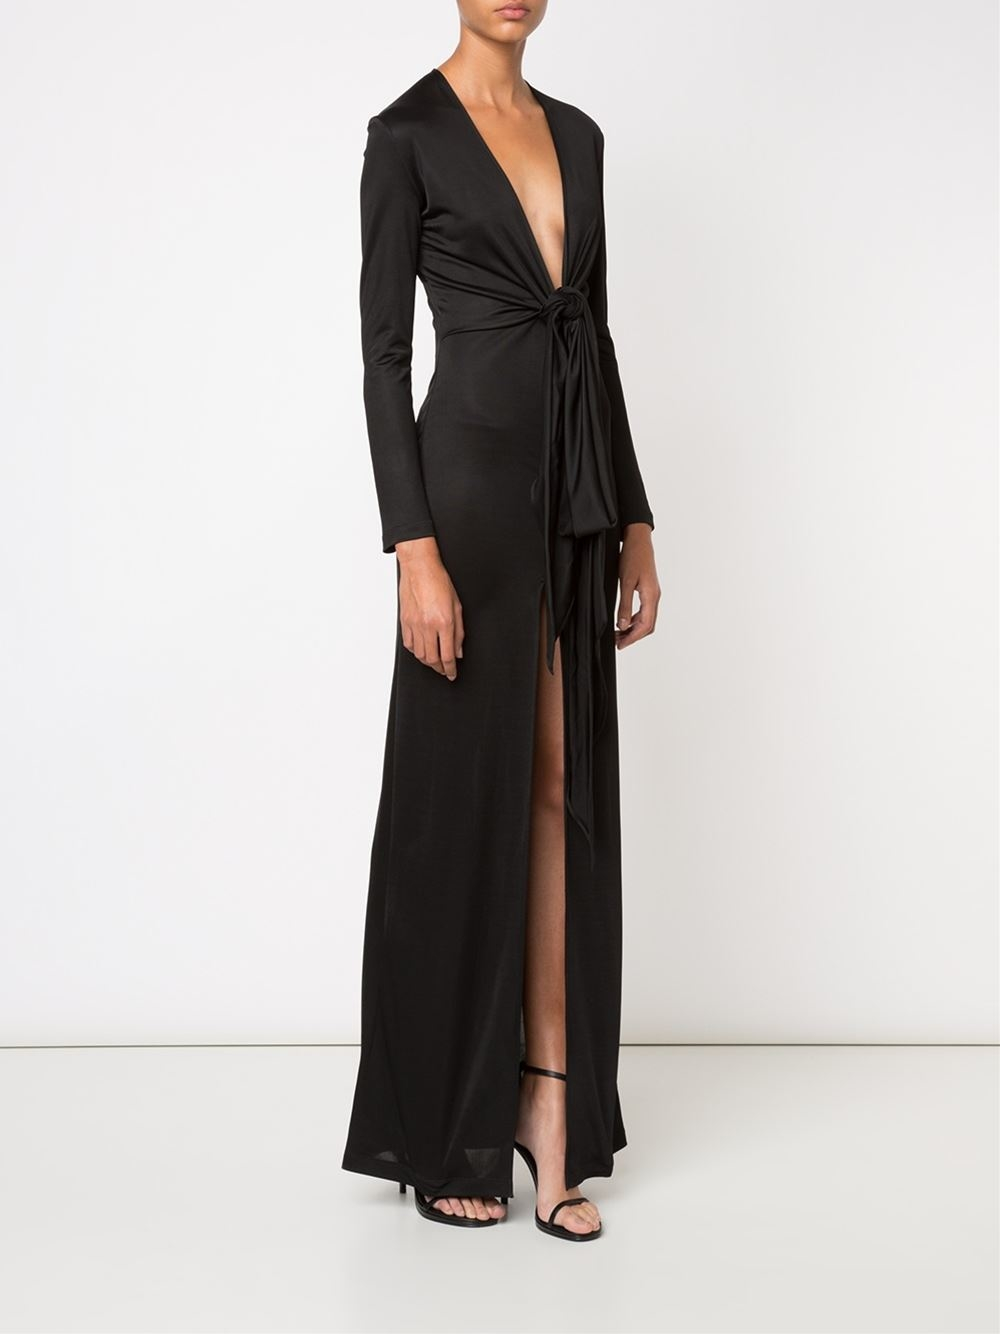 Lyst - Givenchy Ruched Side Slit Gown in Black